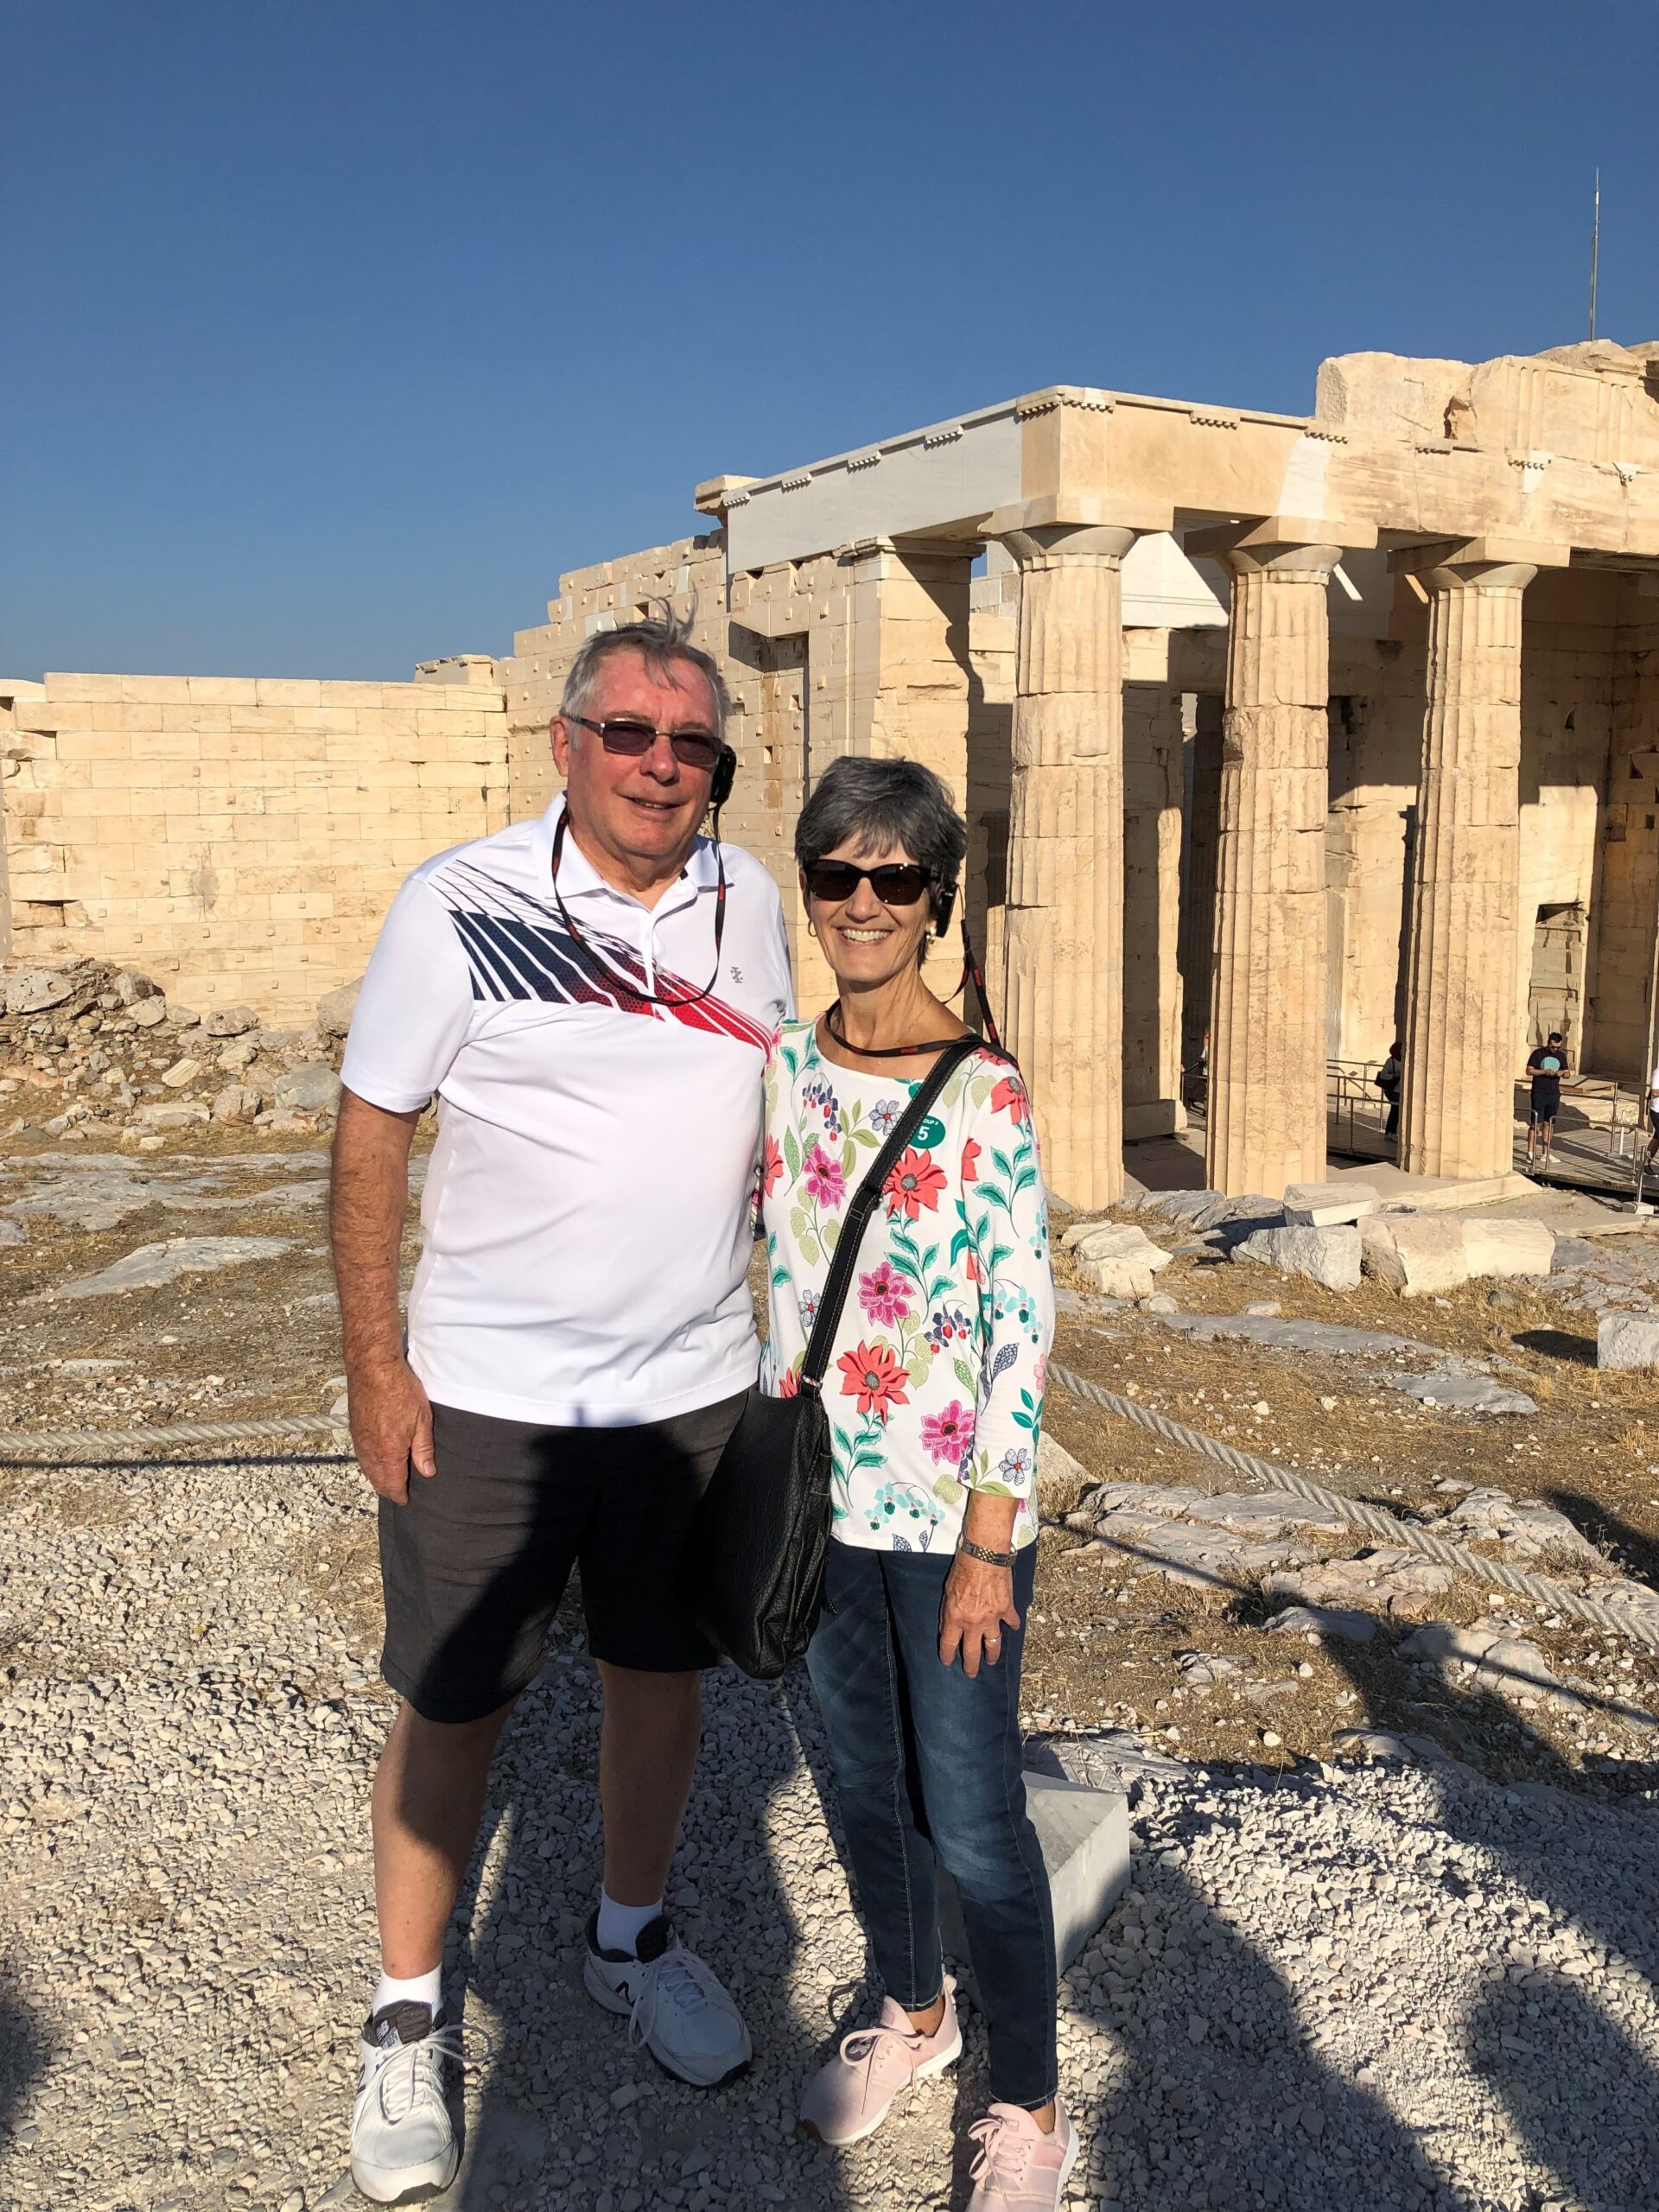 Al and Pam in Greece